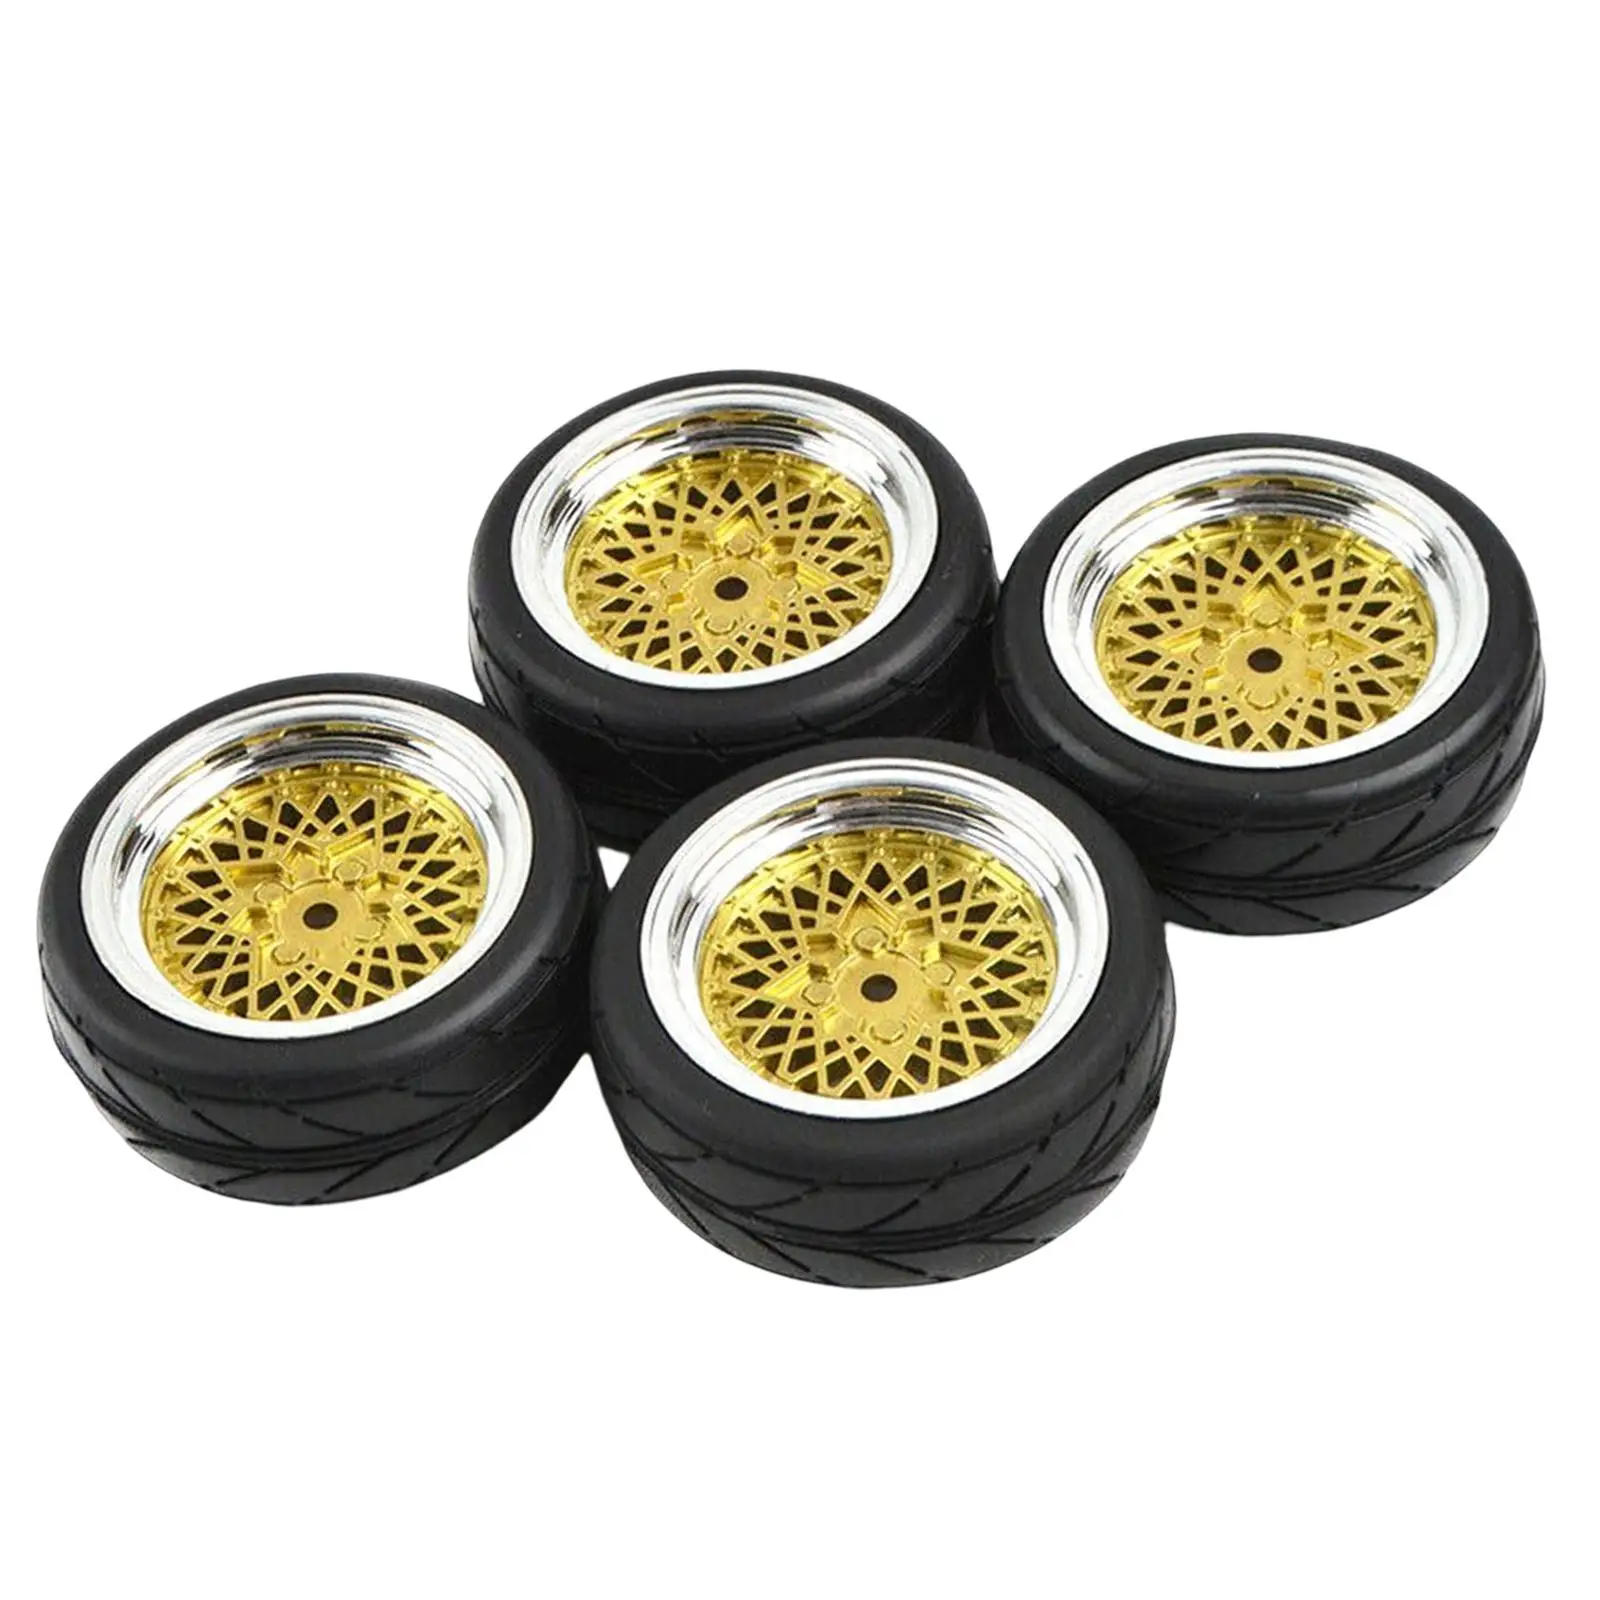 4Pcs 1:10 RC Wheel Rim and Tires Upgrade for HSP Remote Control Car Model Buggy Vehicles Trucks